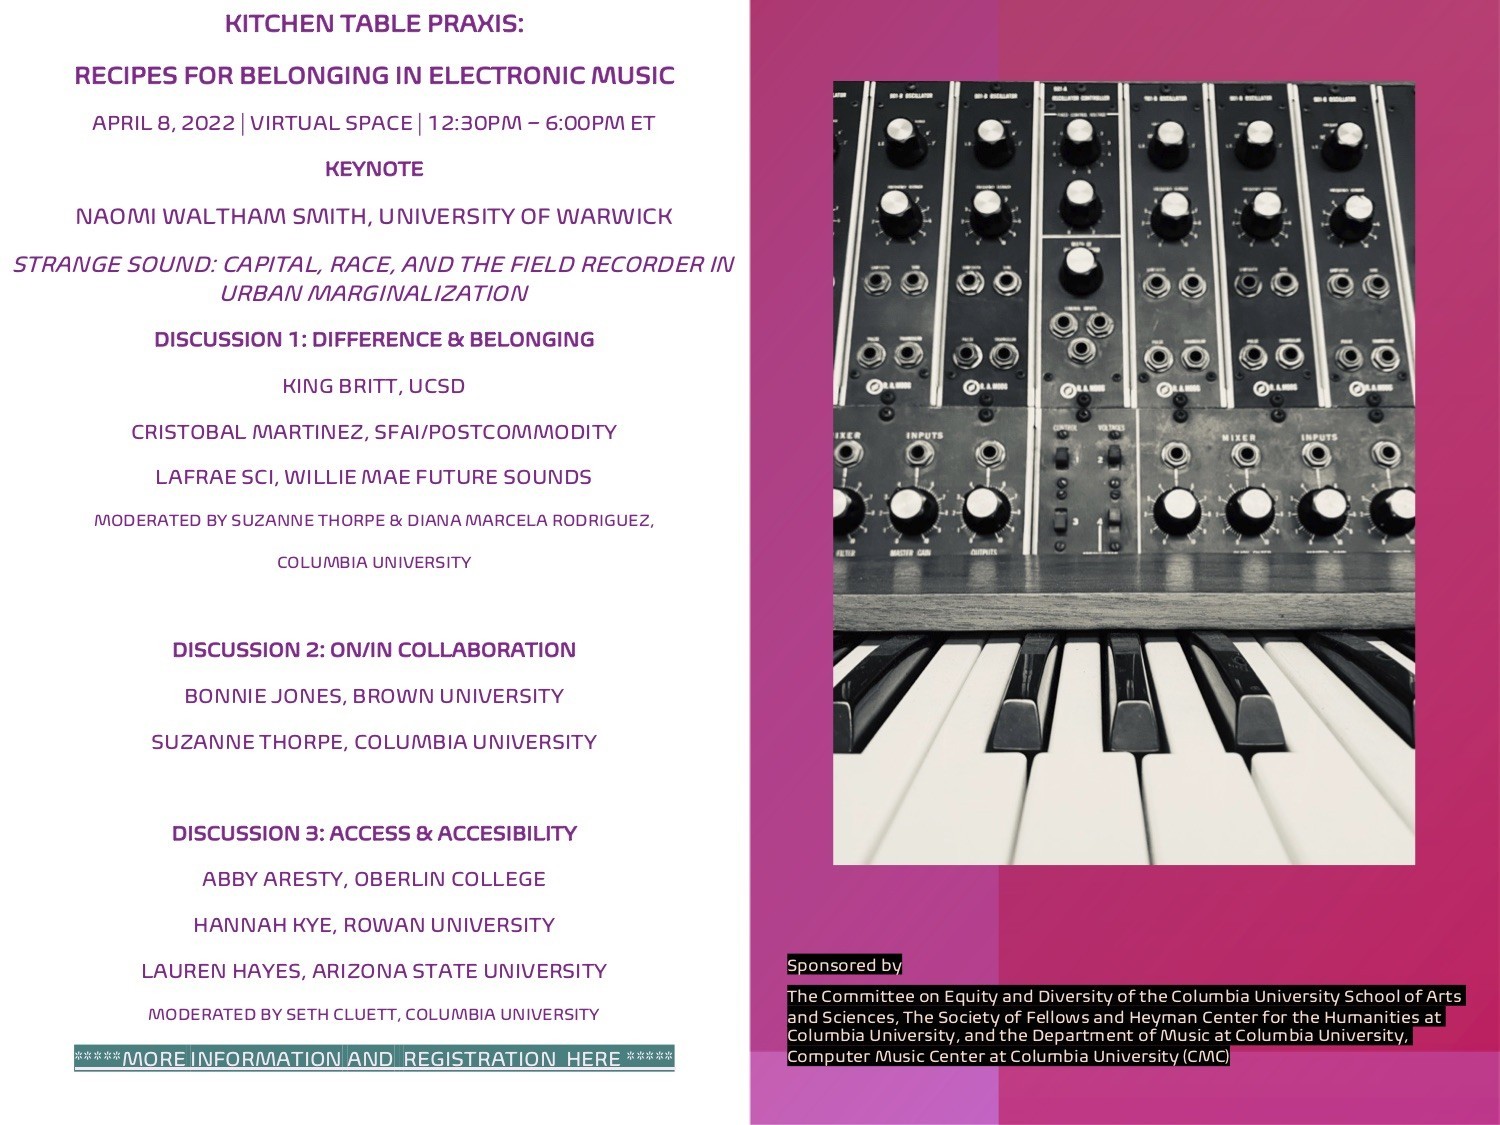 Picture of Kitchen Table Praxis: Recipes for Belonging in Electronic Music poster